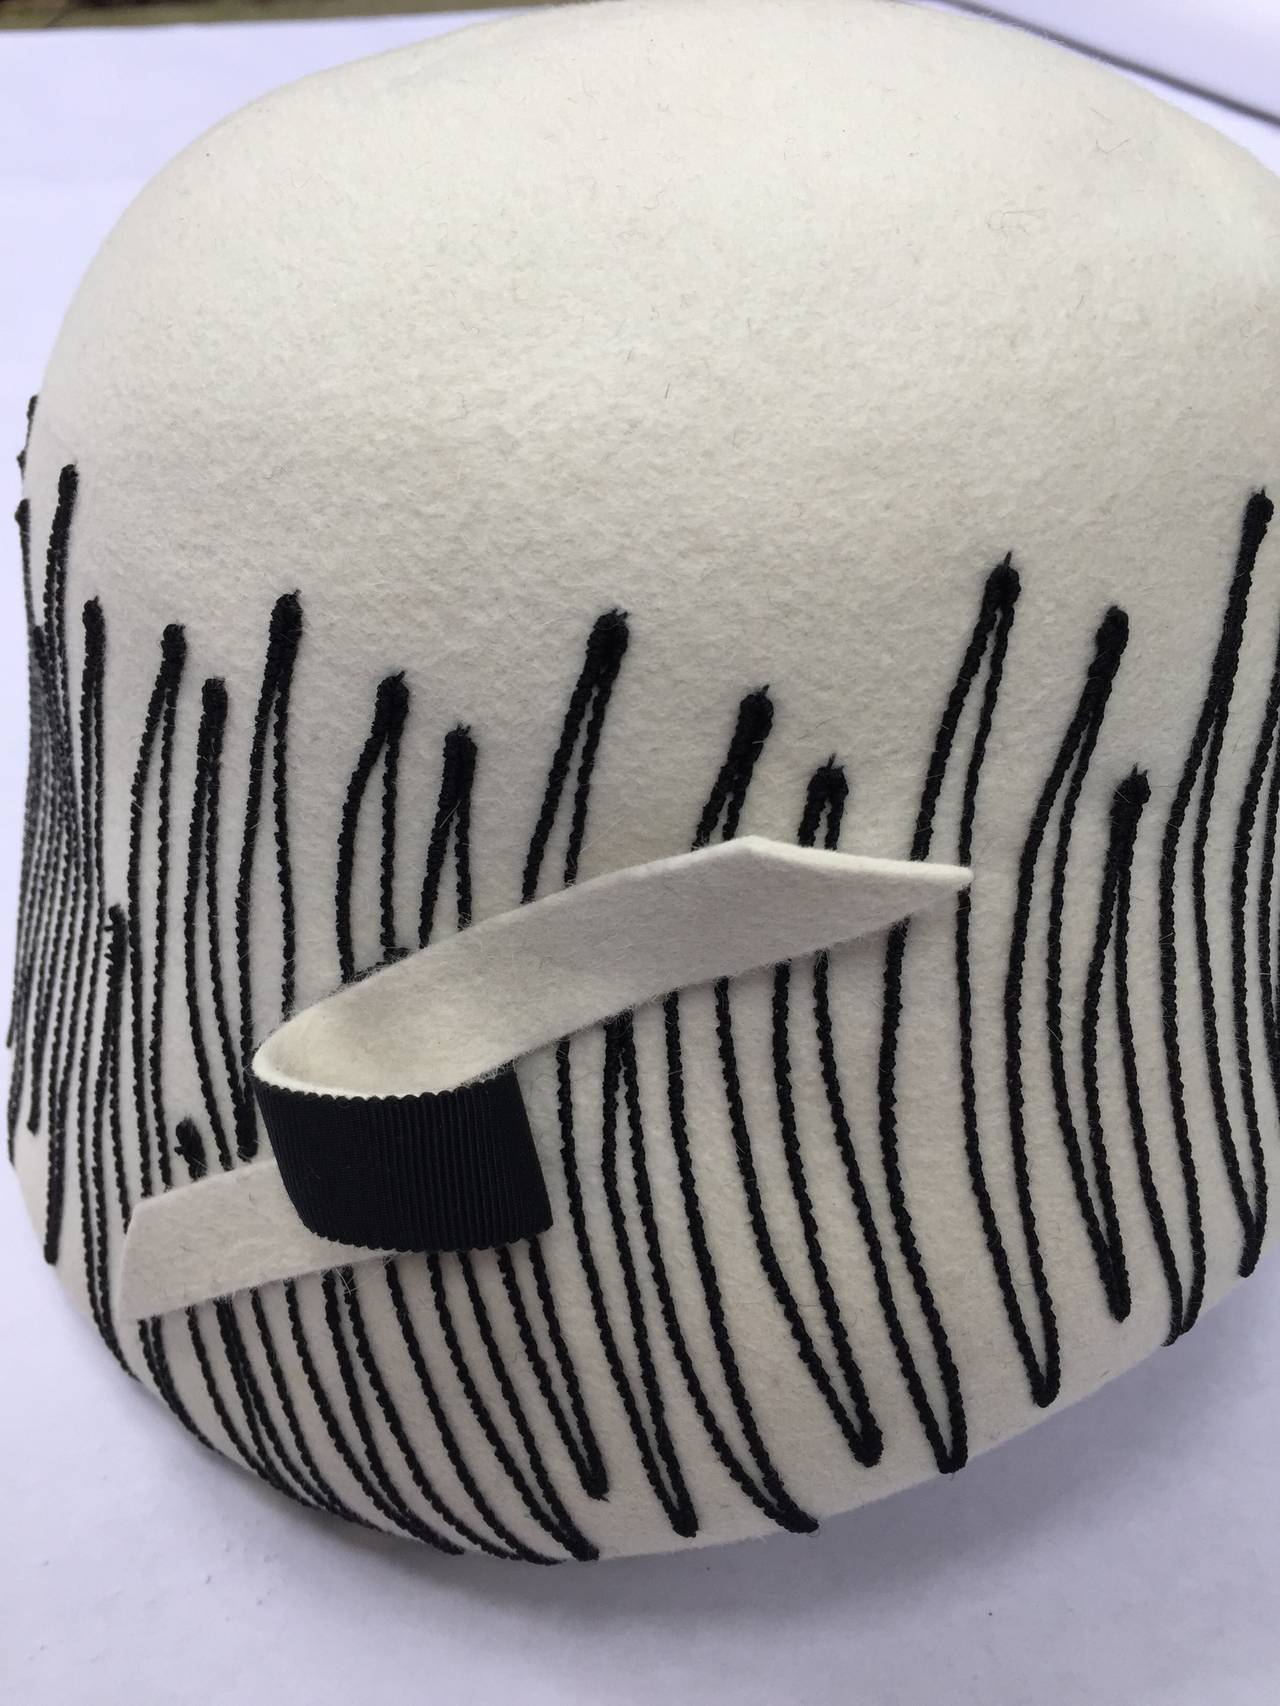 Elsa Schiaparelli 1950s off white Cloche-style wool felt hat.  The hat has a deep, cylindrical, domed crown of off-white or cream felt which extends downwards on one side. Around the crown is black zig-zag stitching, and on the side where the crown